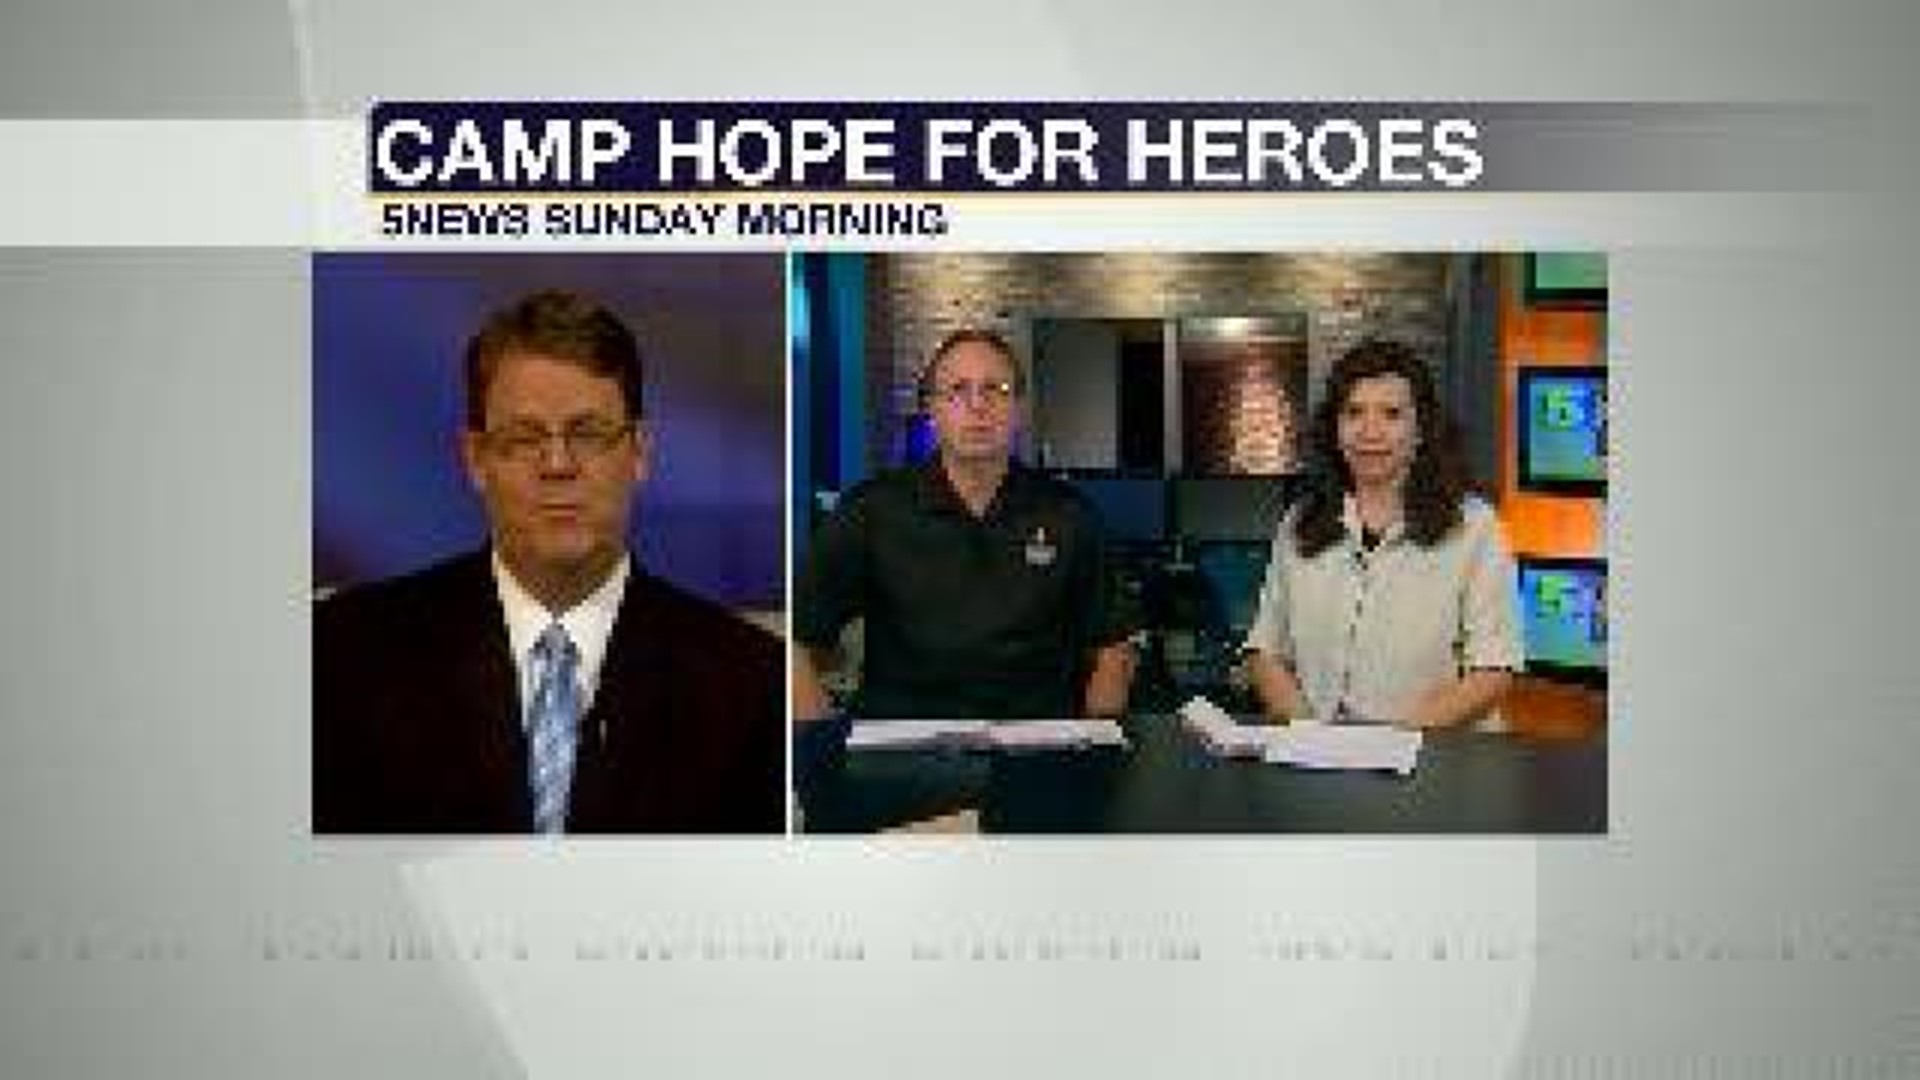 Camp Hope for Heroes